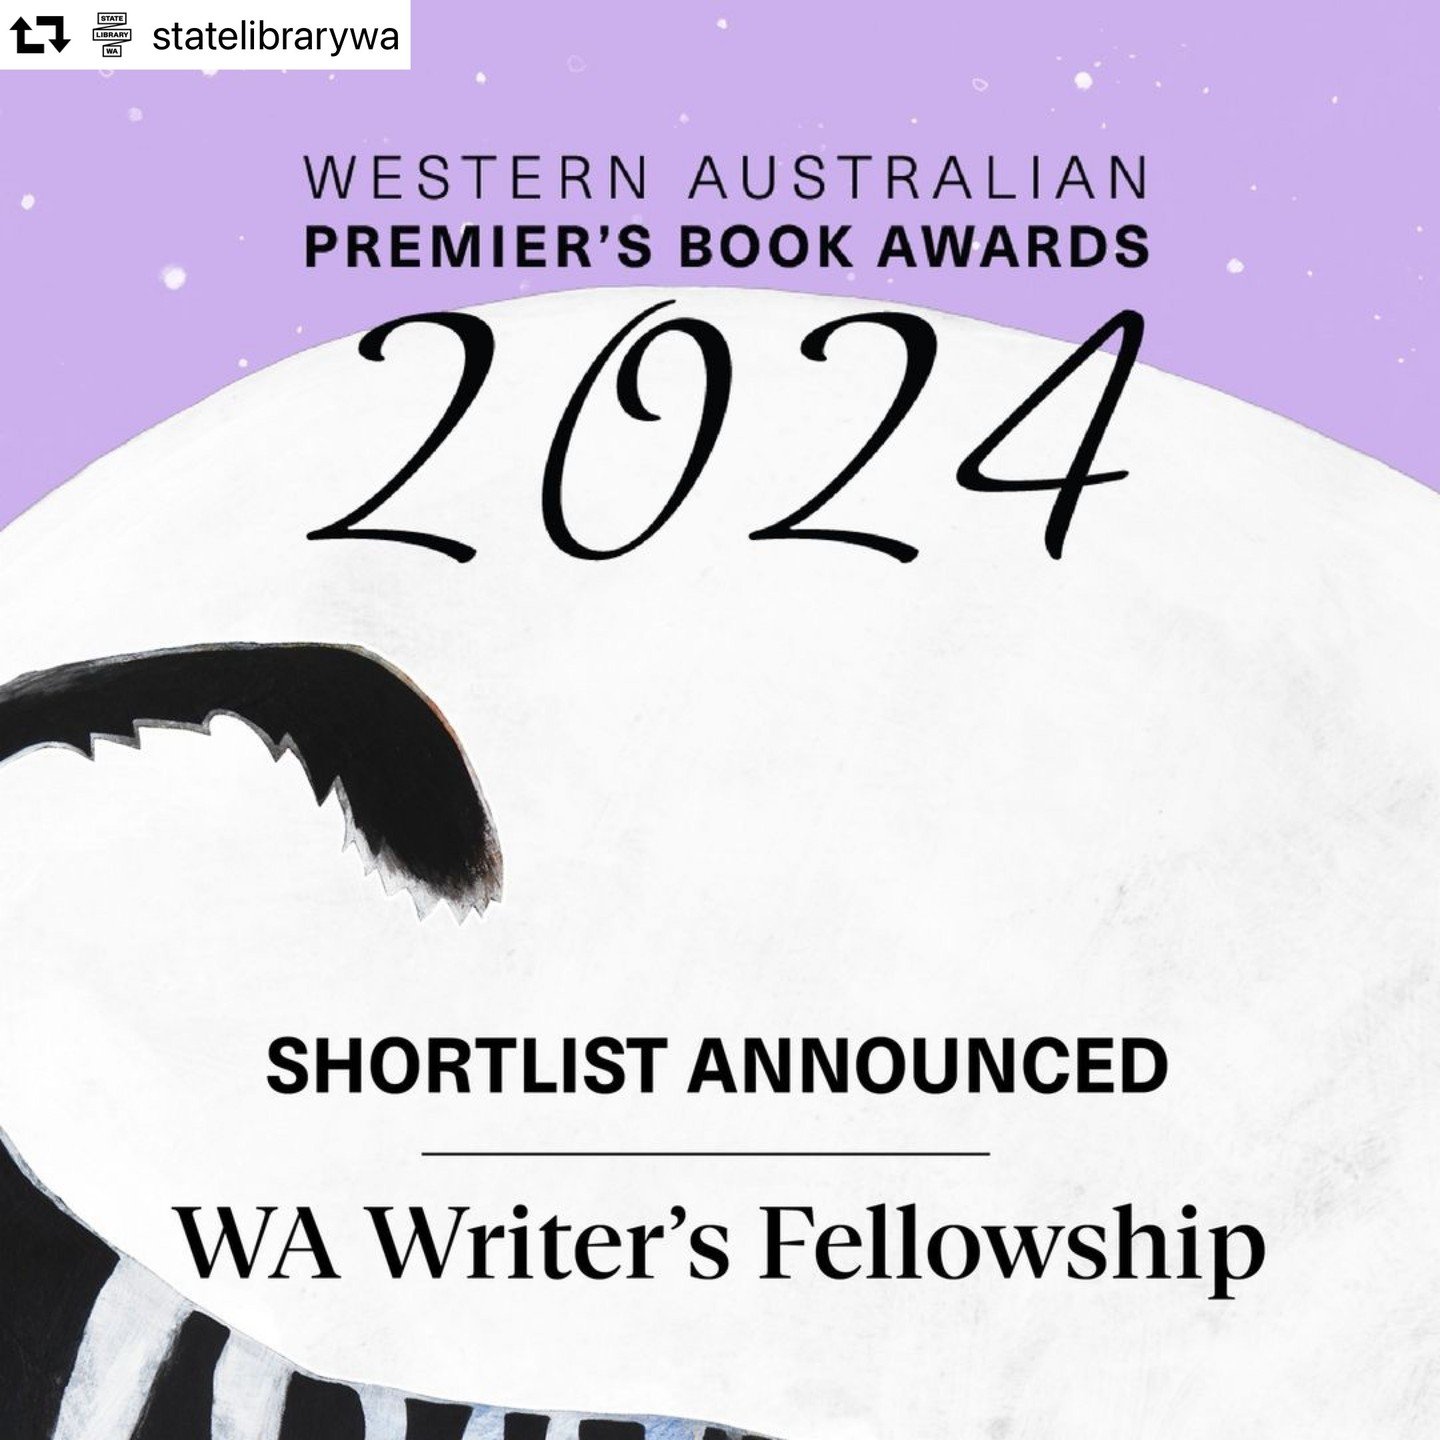 Super-stoked to have been shortlisted for the WA Writer's Fellowship in the 2024 Western Australian Premier's Book Awards. Thanks to the State Library of WA, this year's judges and the DLGSC and congratulations to those shortlisted in the various cat